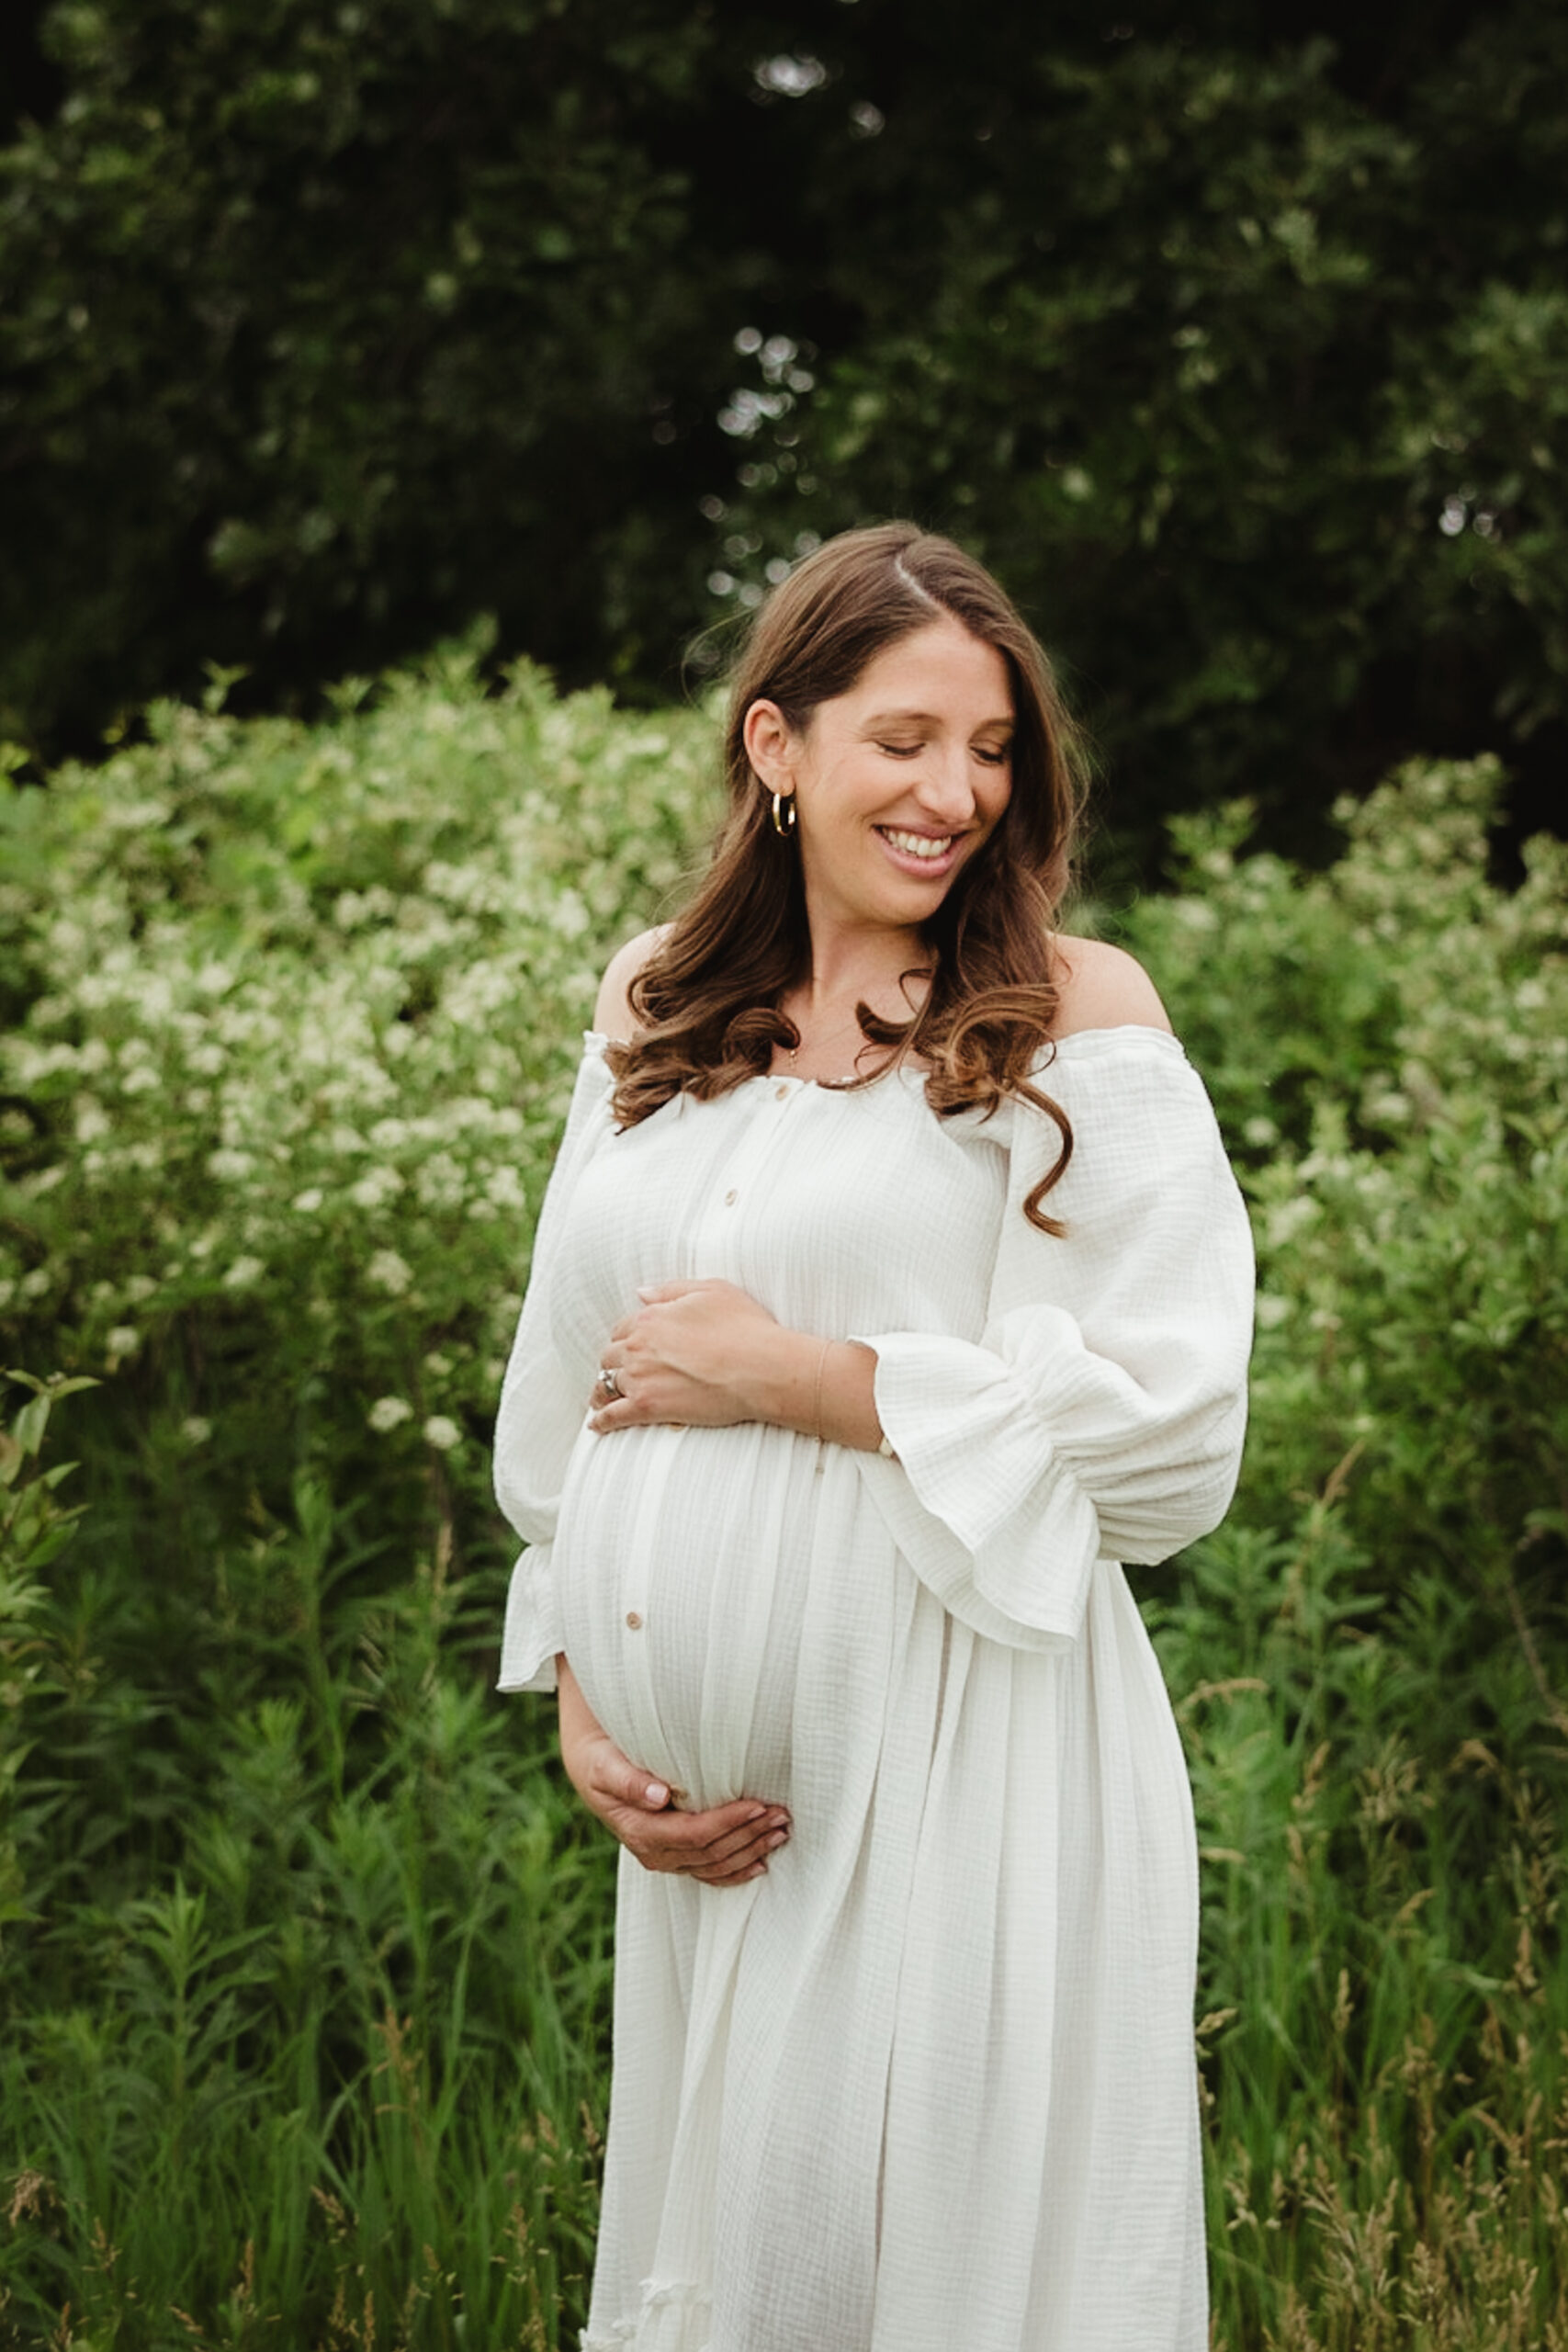 A pregnant mom cradles her growing belly during her maternity session.